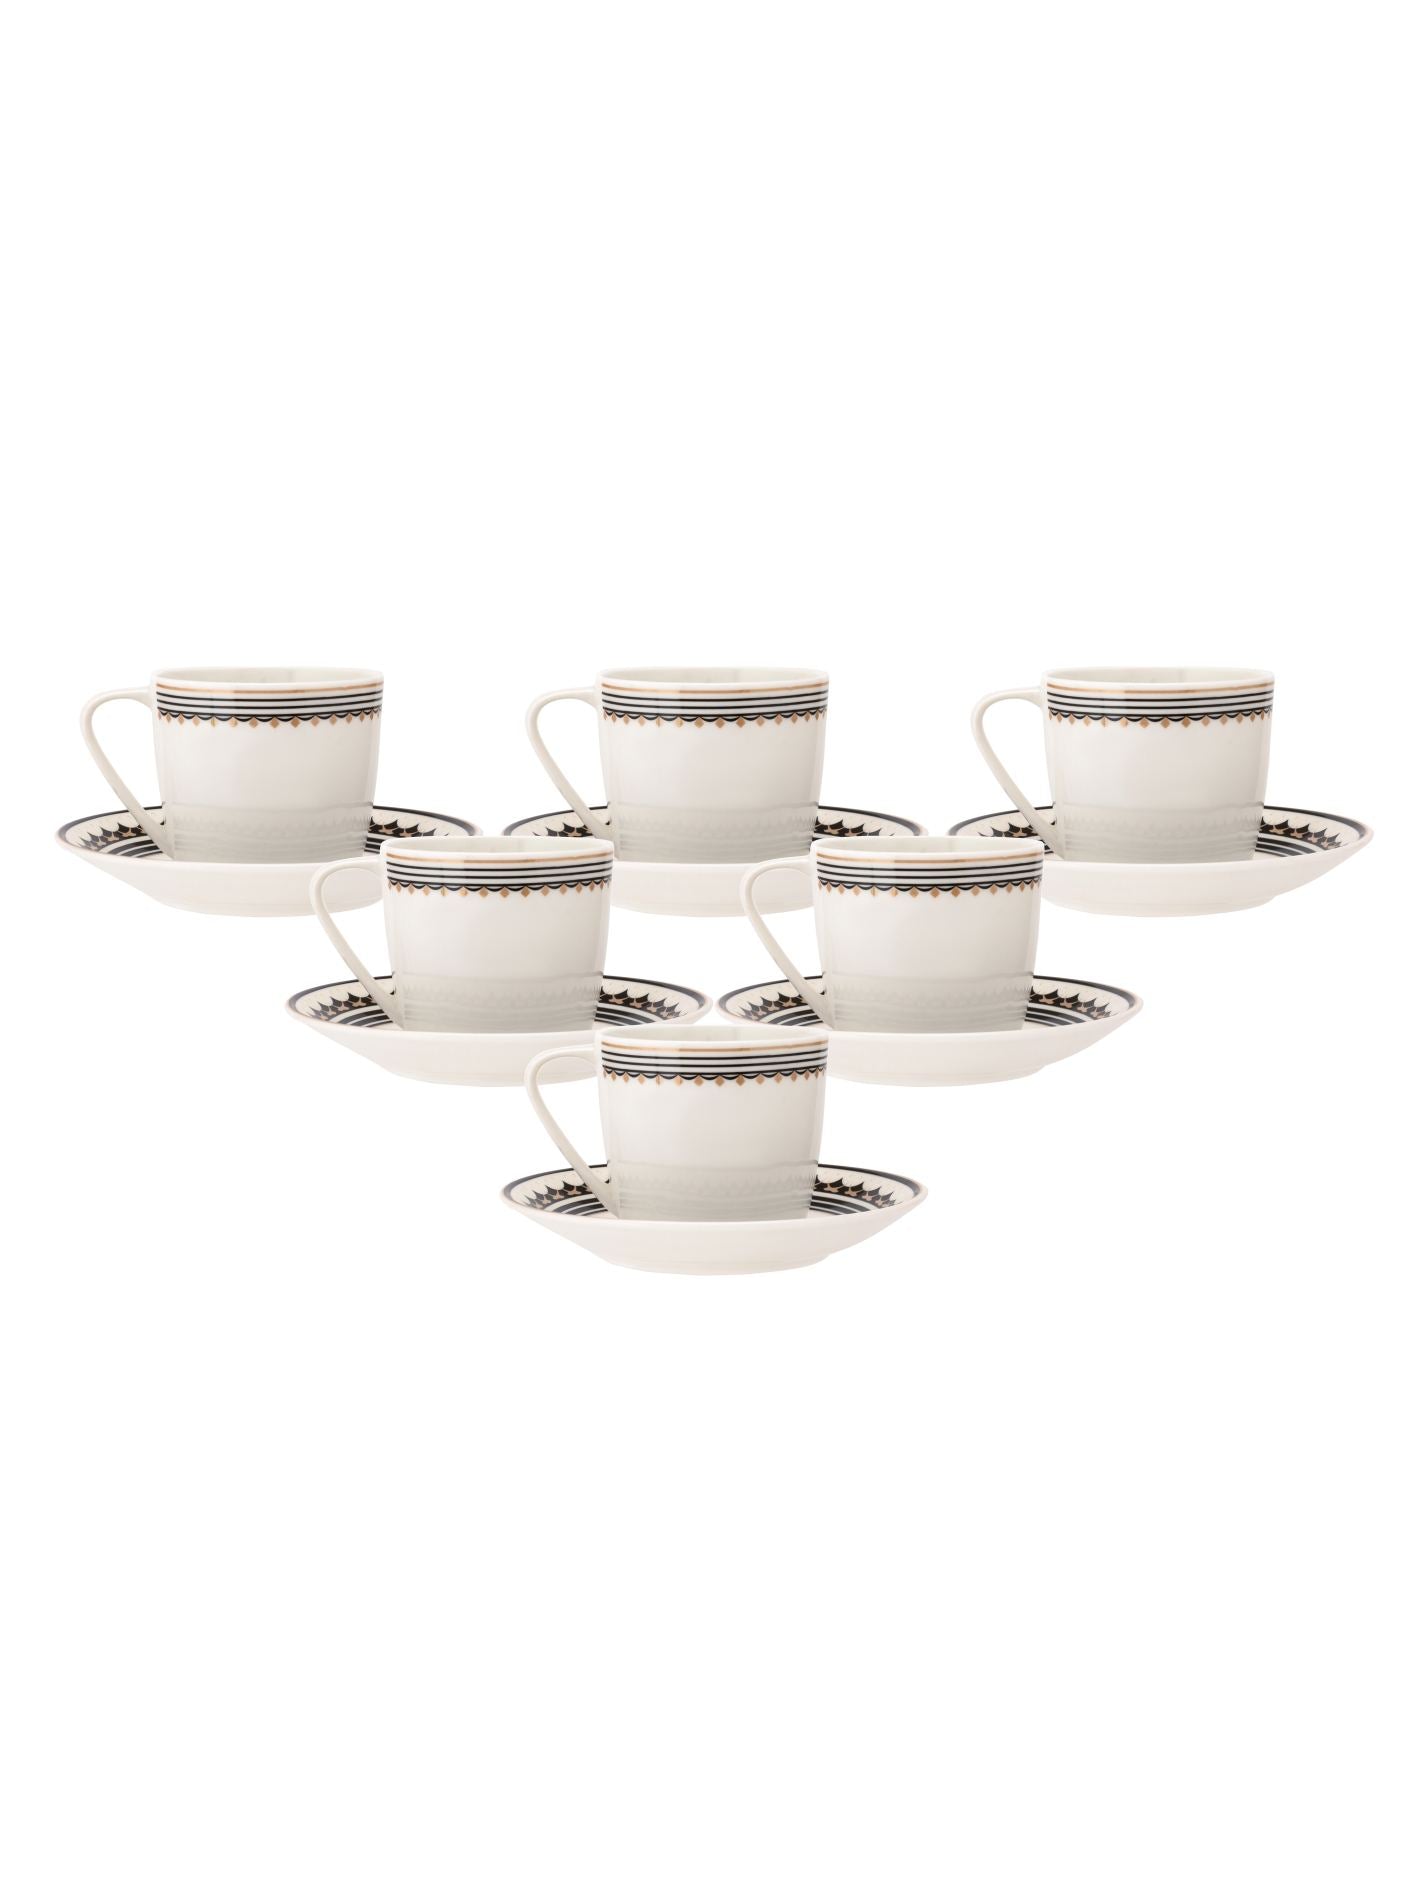 Cheers Super Cup & Saucer, 170 ml, Set of 12 (6 Cups + 6 Saucers) (S382)